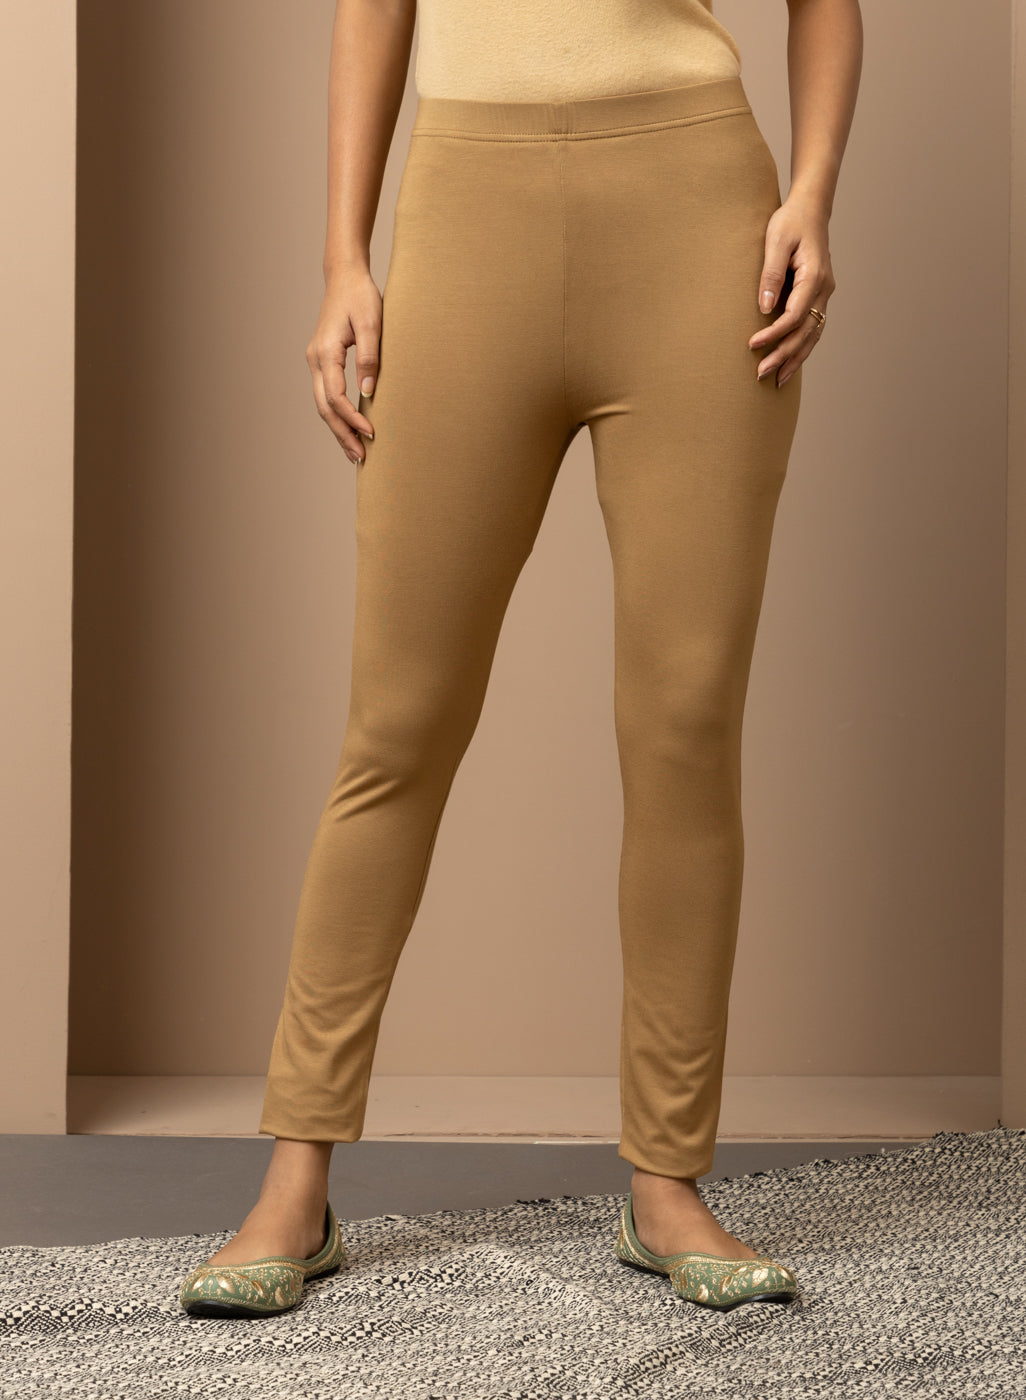 comfort choice Ankle Length Western Wear Legging Price in India